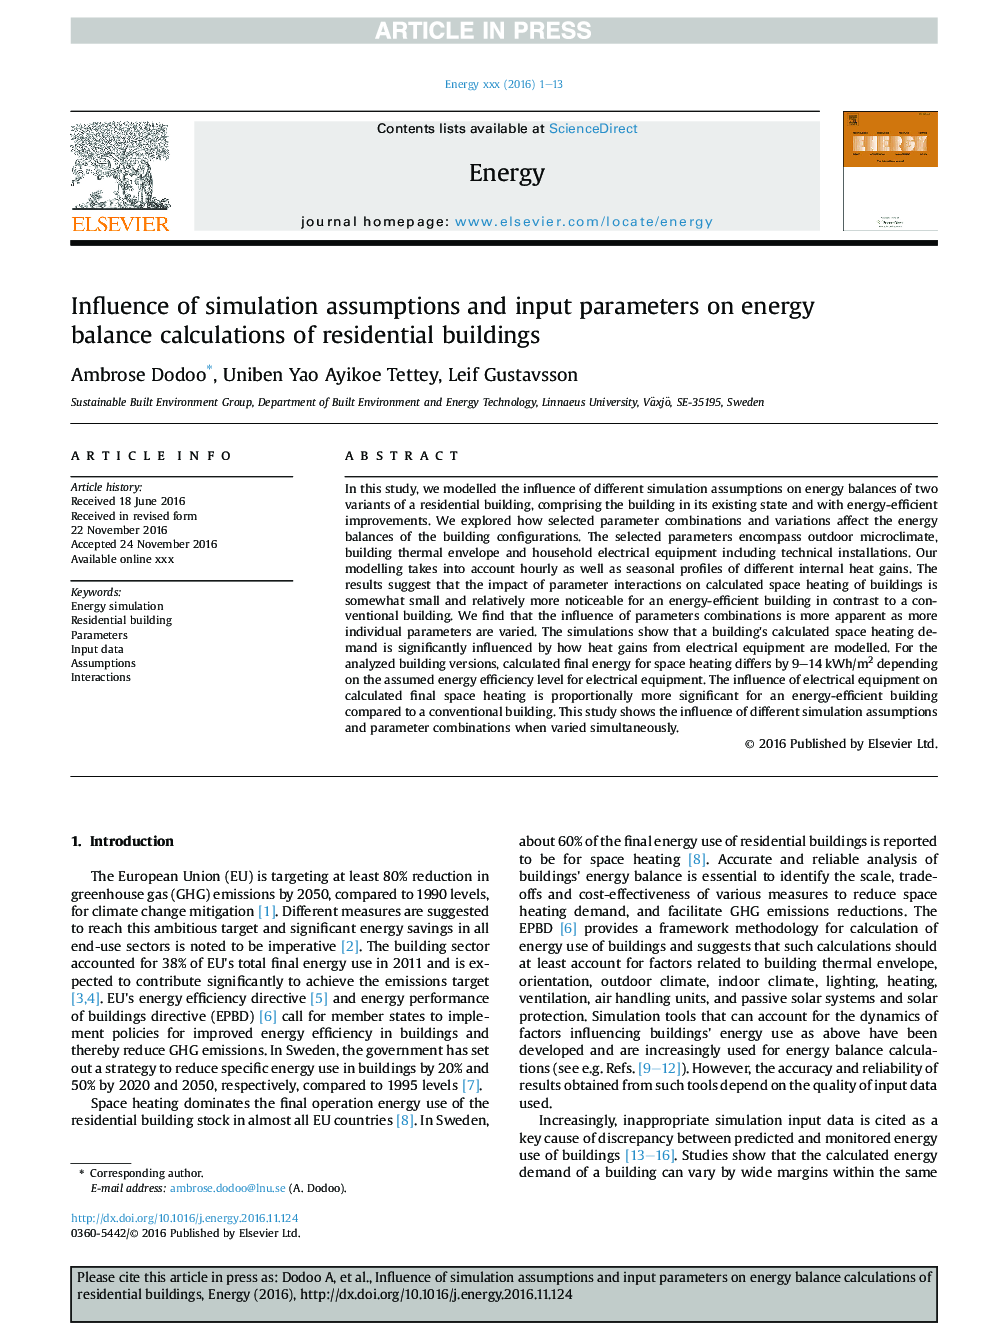 Influence of simulation assumptions and input parameters on energy balance calculations of residential buildings